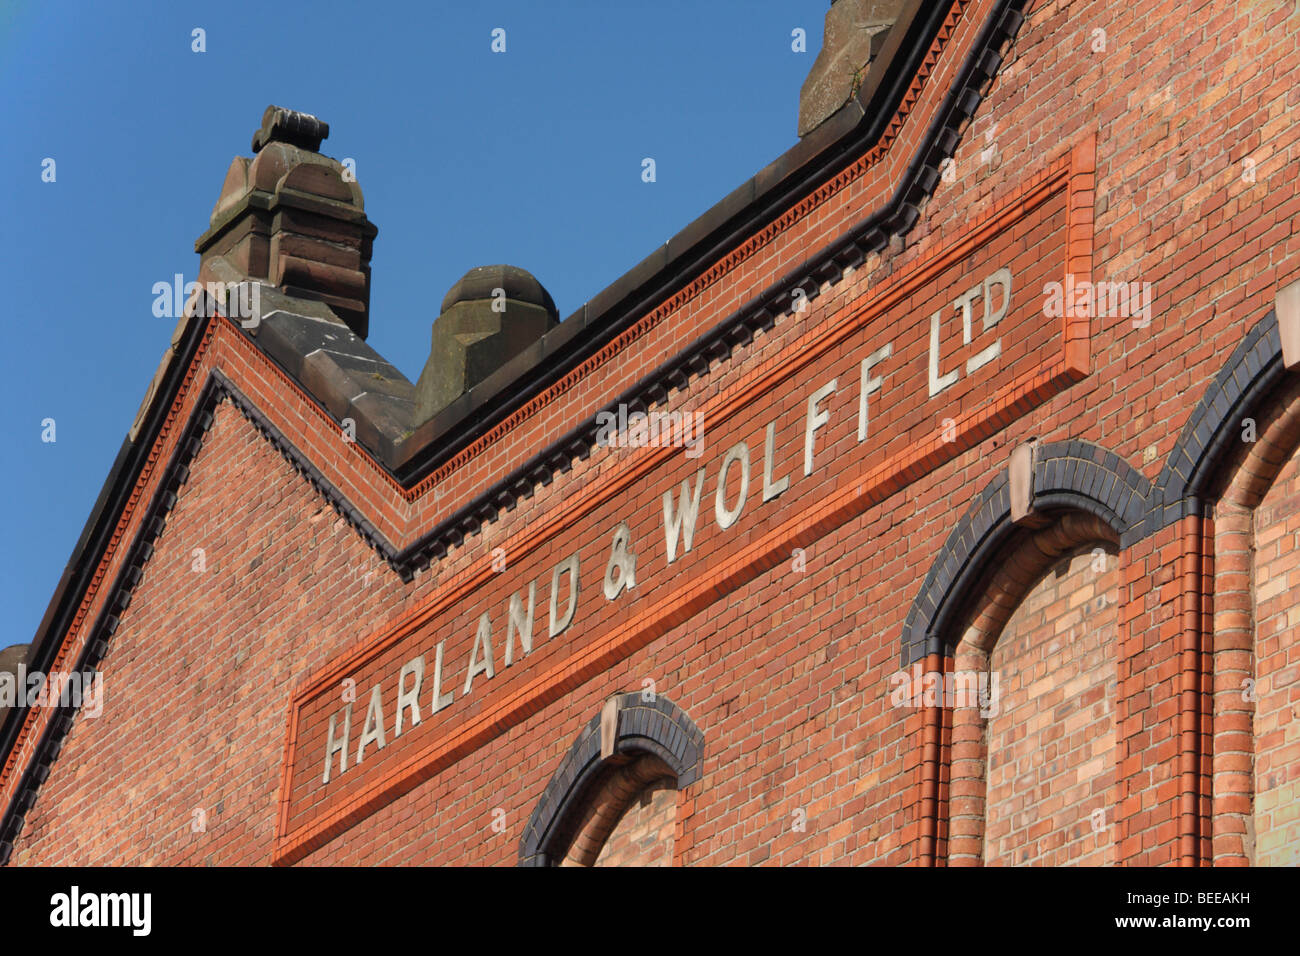 The former foundry building of Harland & Wolff Ltd, shipbuilders, Bootle, 4 miles north of Liverpool, England Stock Photo